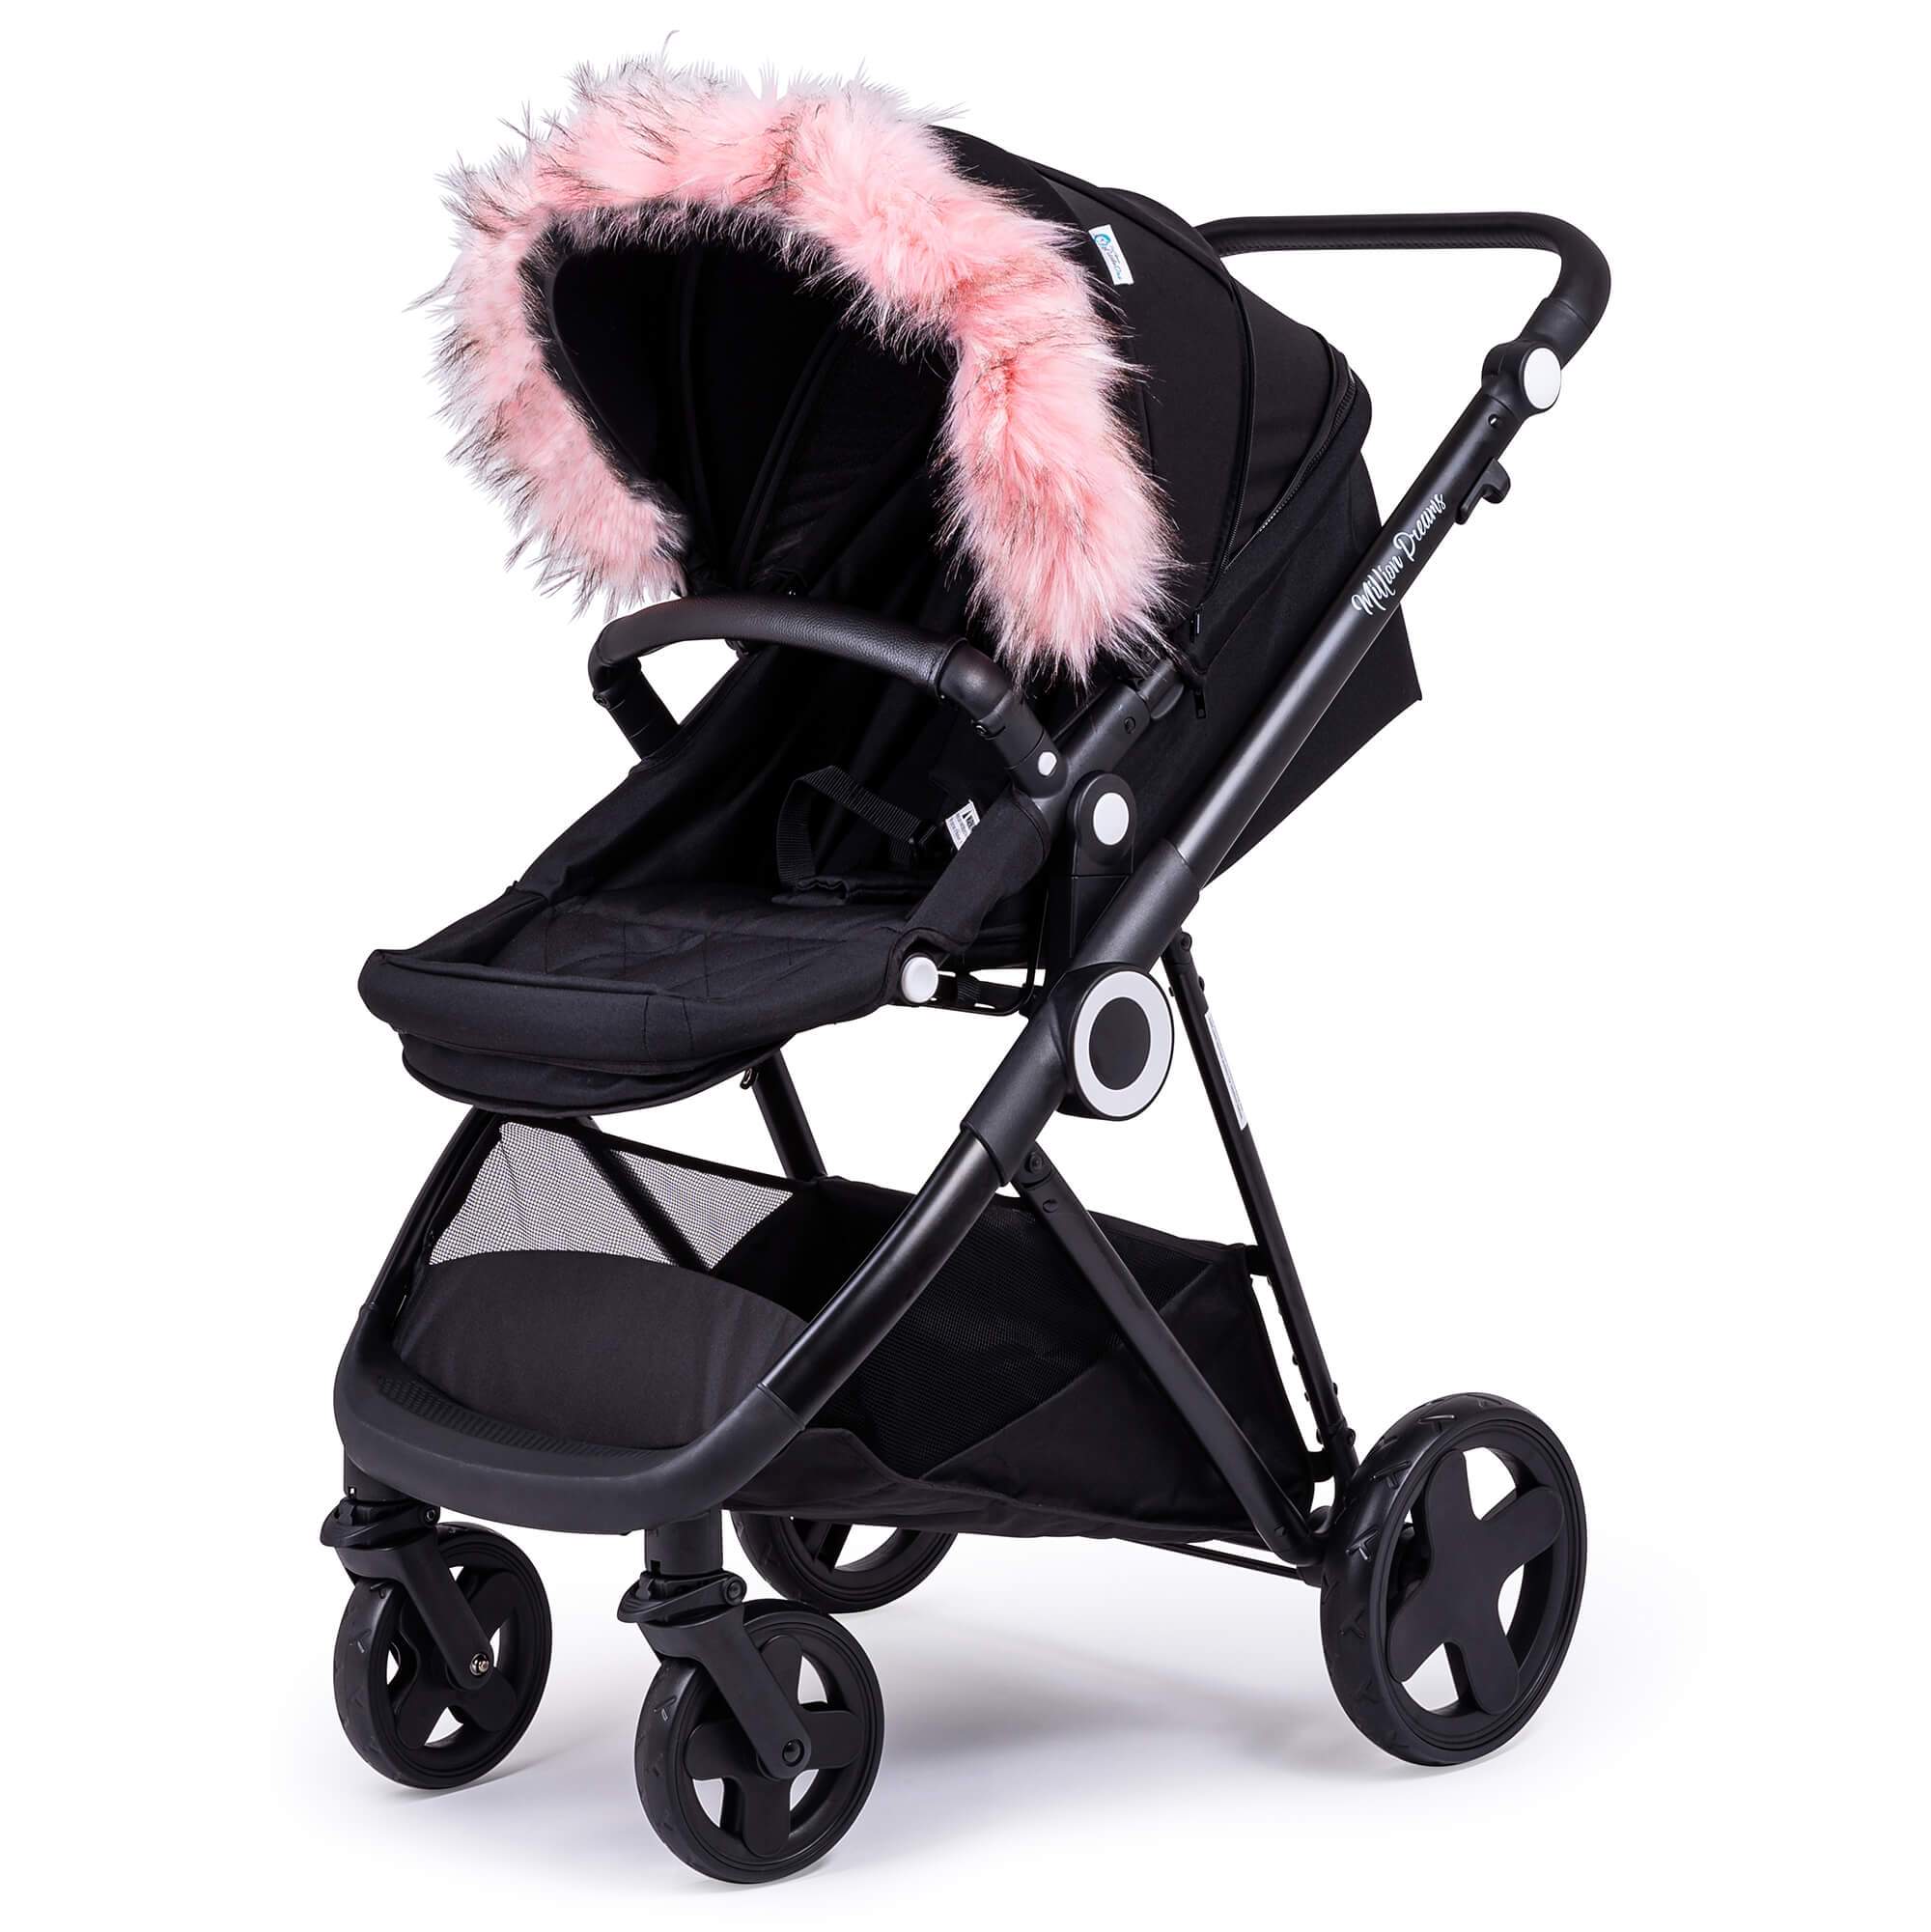 Pram Fur Hood Trim Attachment for Pushchair Compatible with Little Shield - Light Pink / Fits All Models | For Your Little One